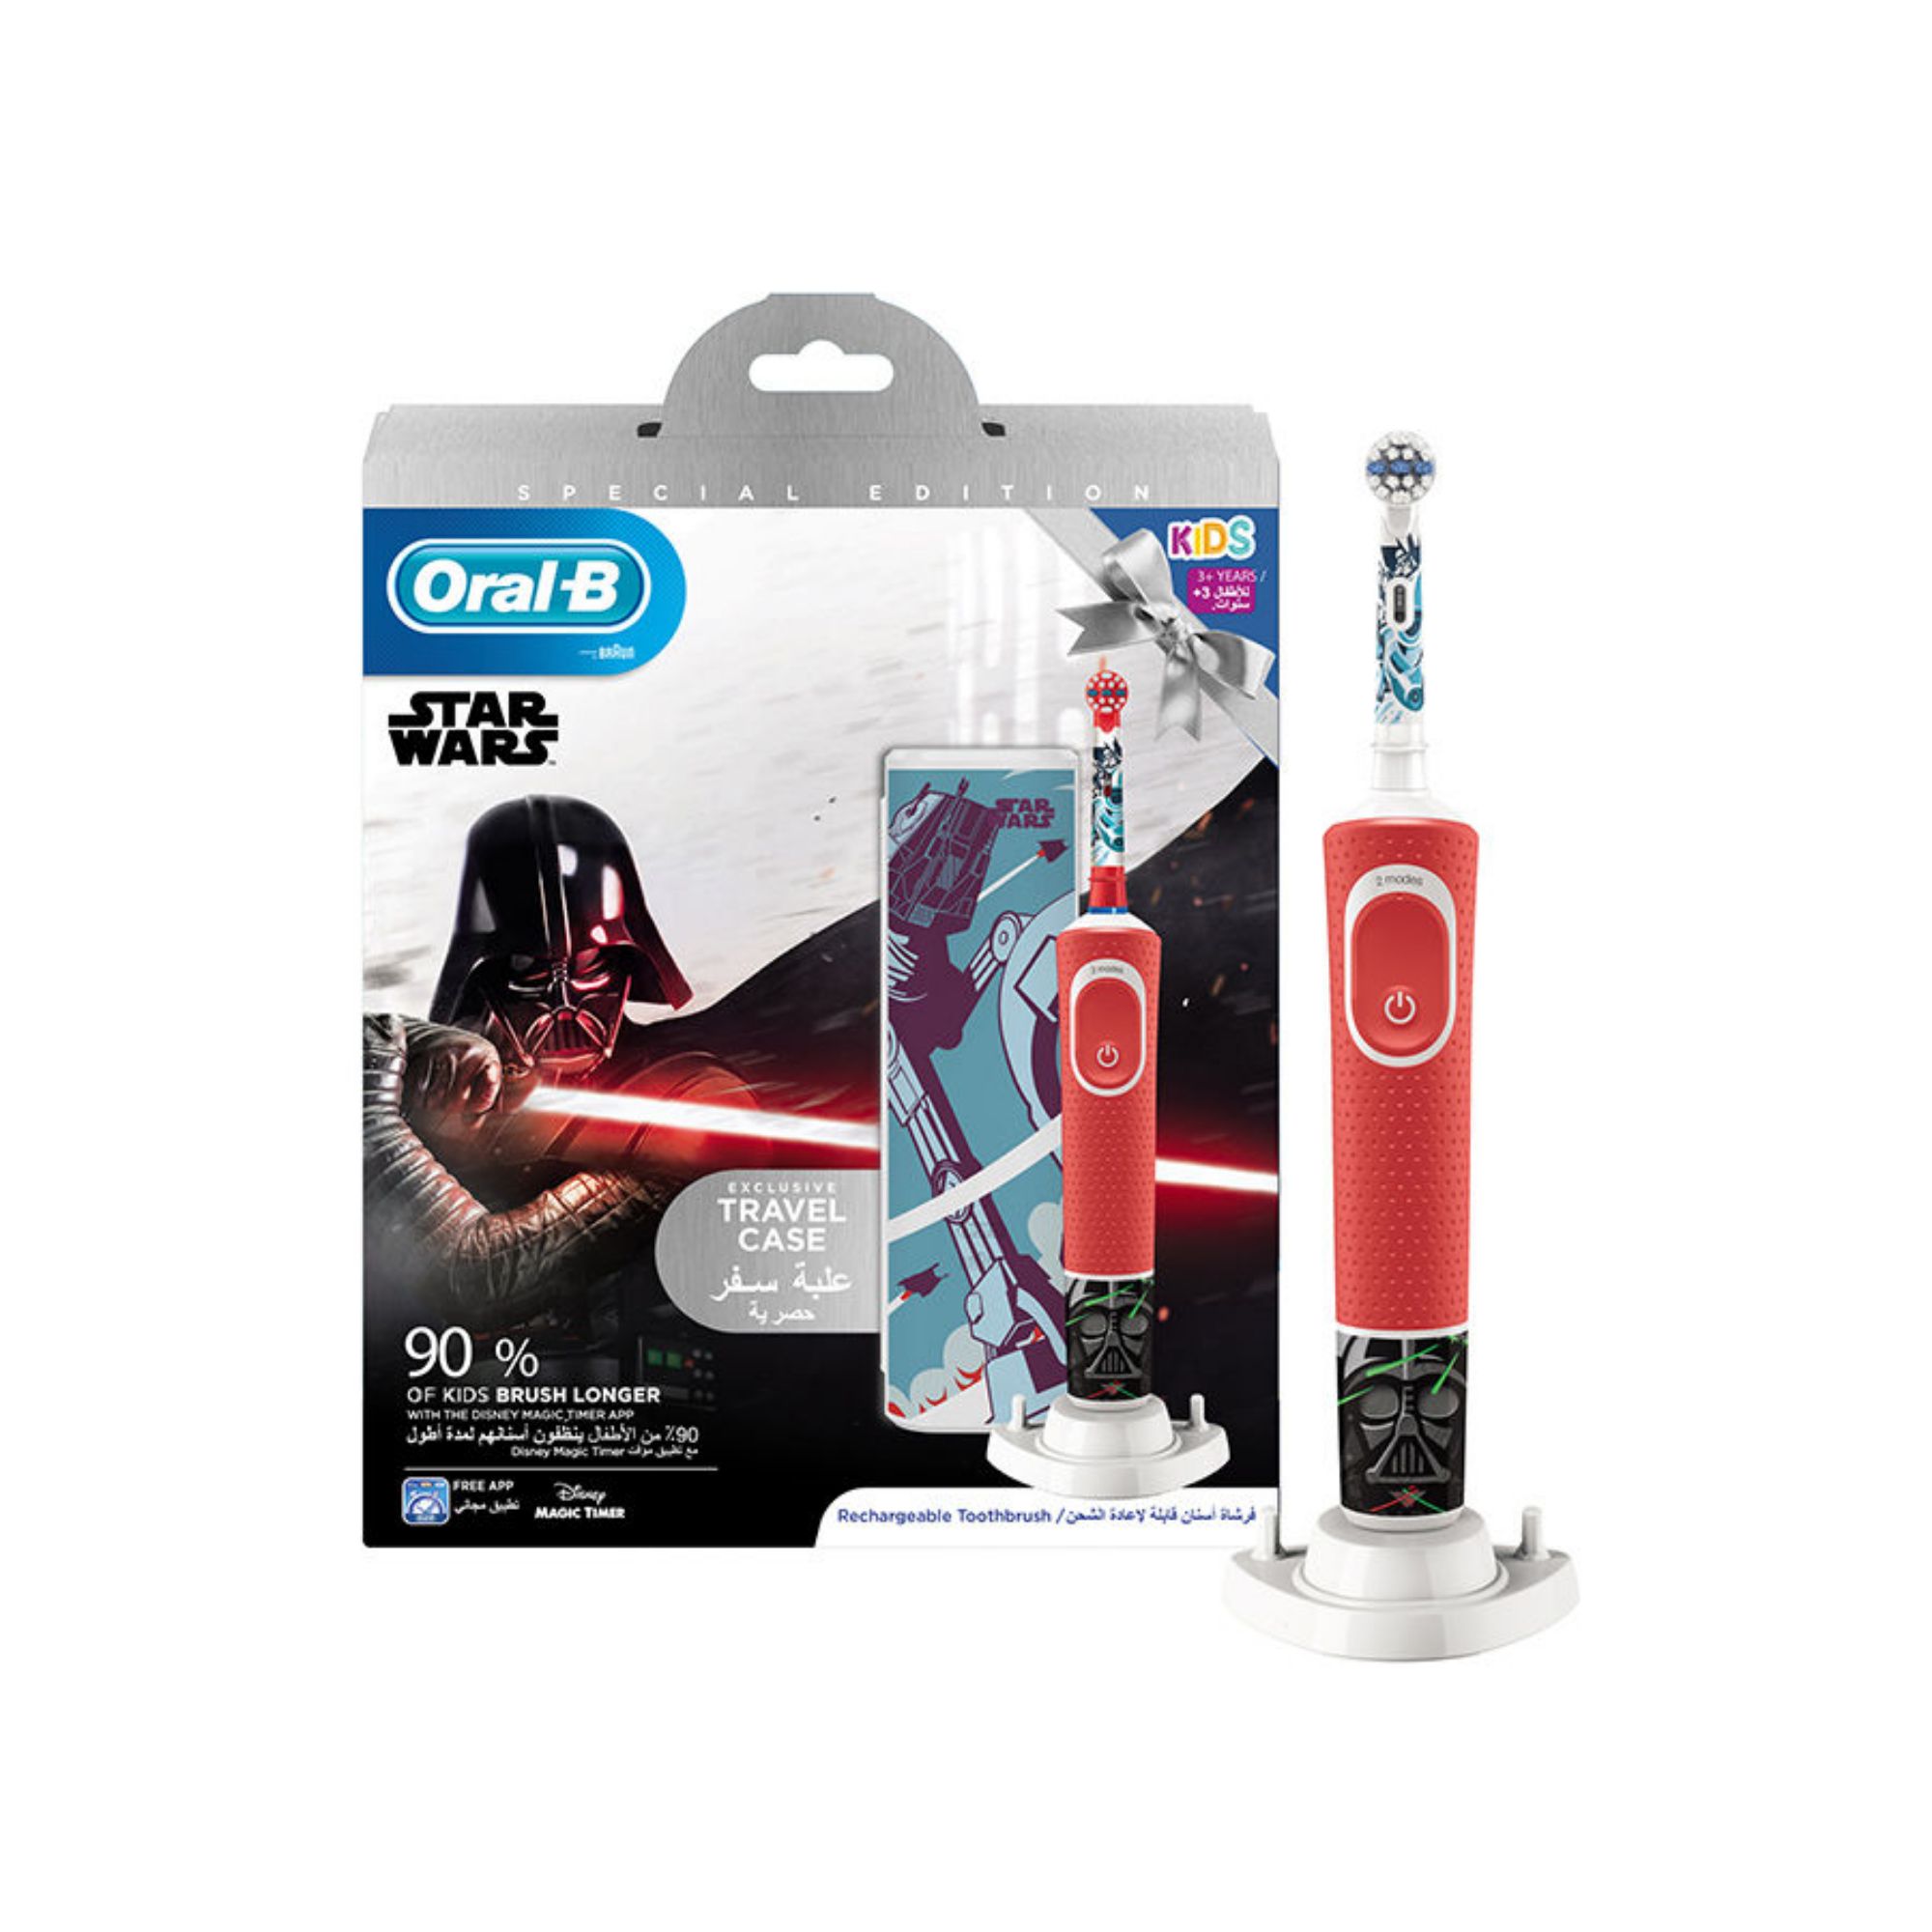 Oral-B Star Wars Electric Toothbrush with Travel Case, Red